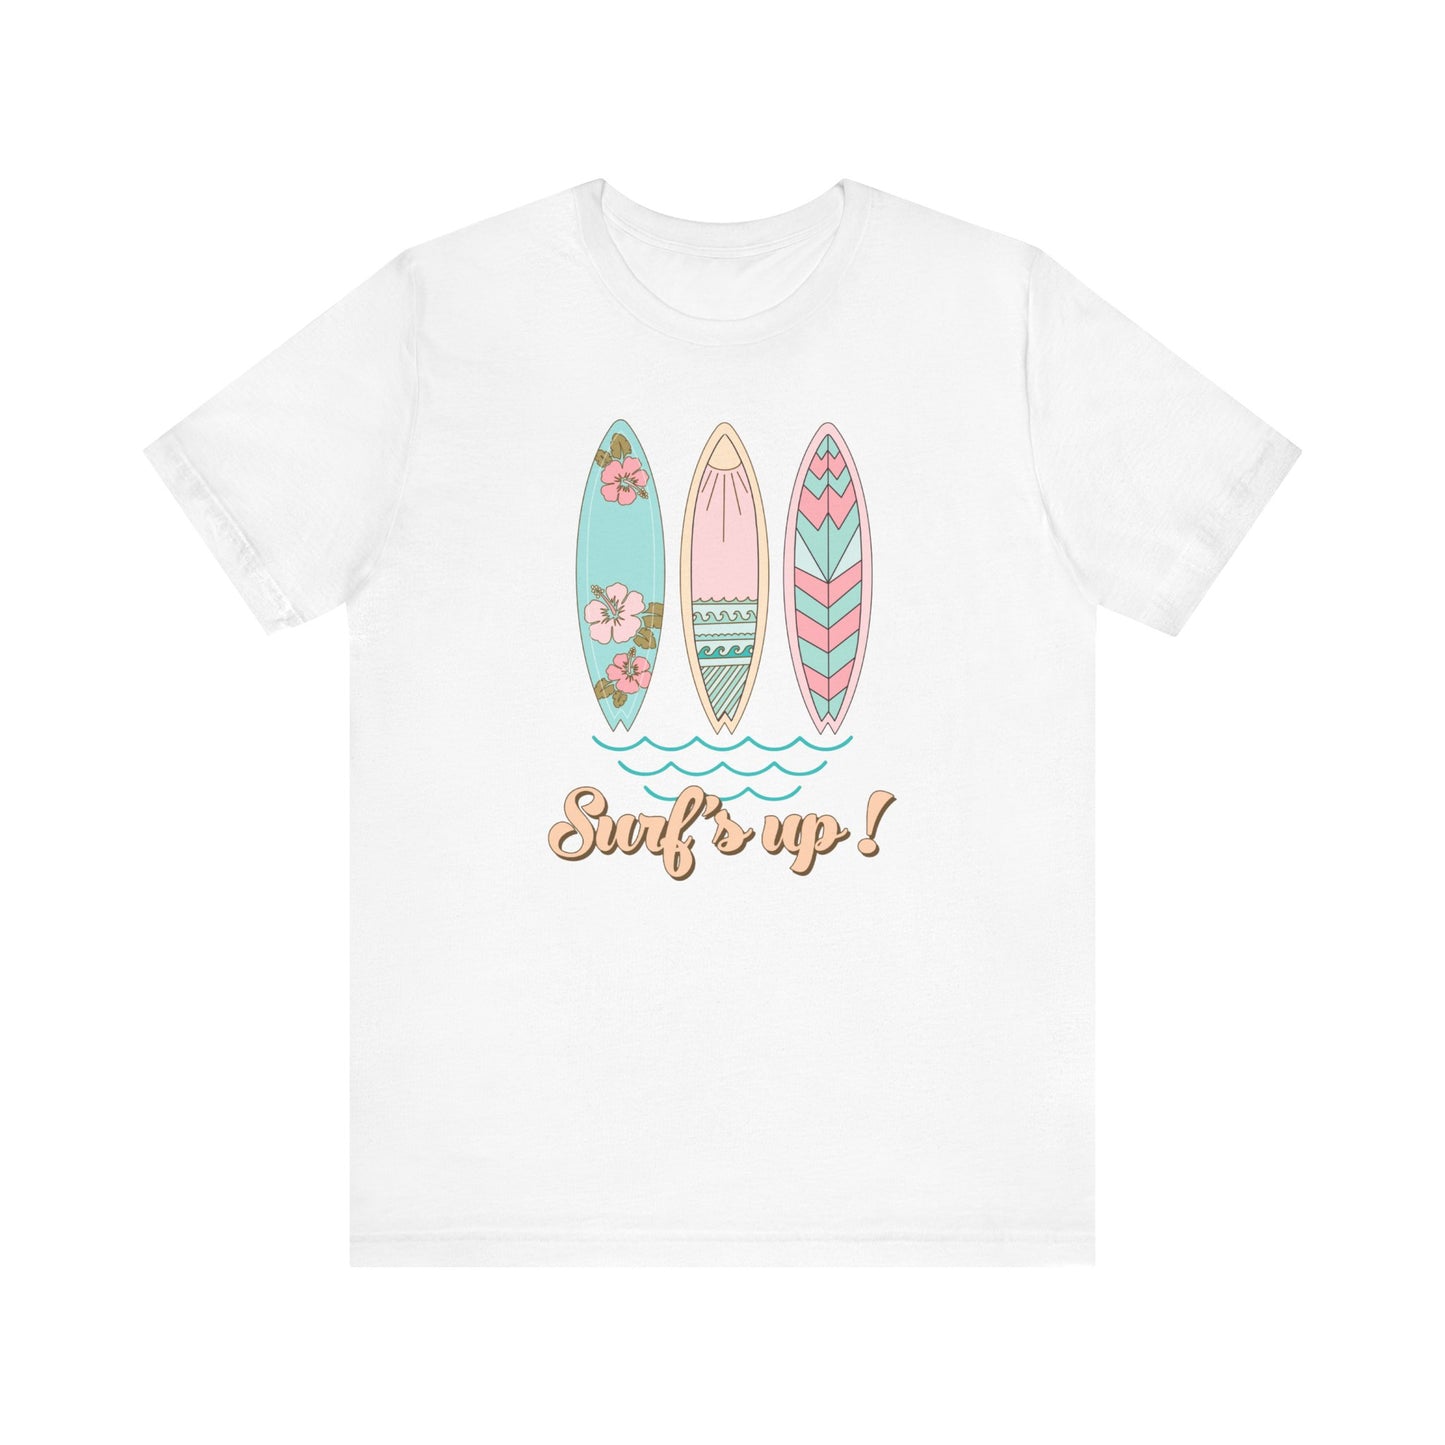 Surf's Up T-Shirt, Beach Lover Graphic Tee, Summer Surfboard Design, Tropical Floral Print